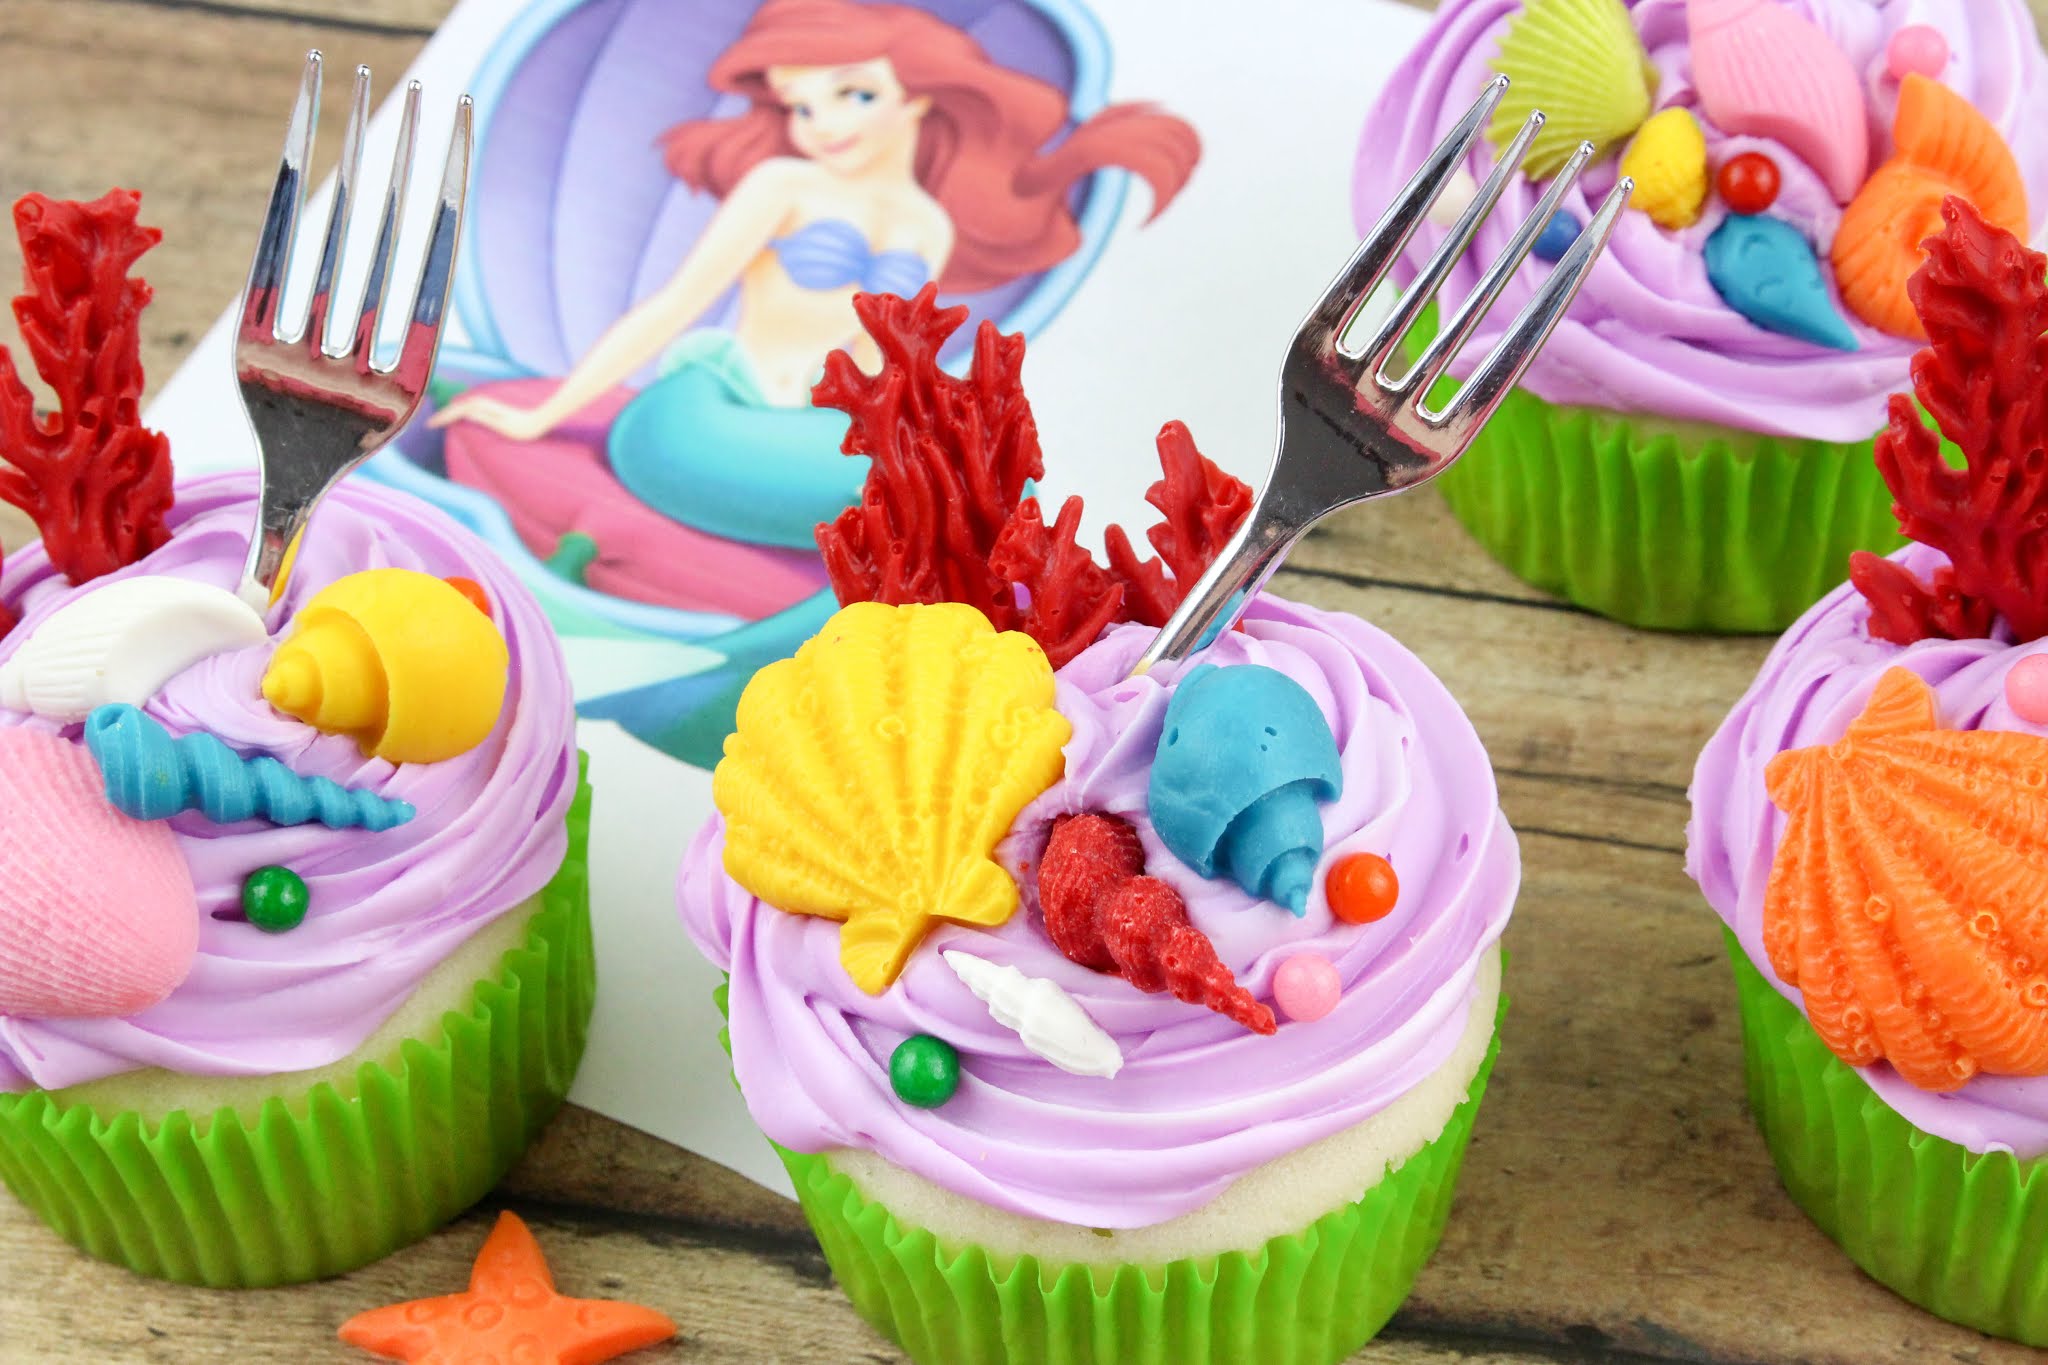 Disney themed cupcakes by K Noelle Cakes